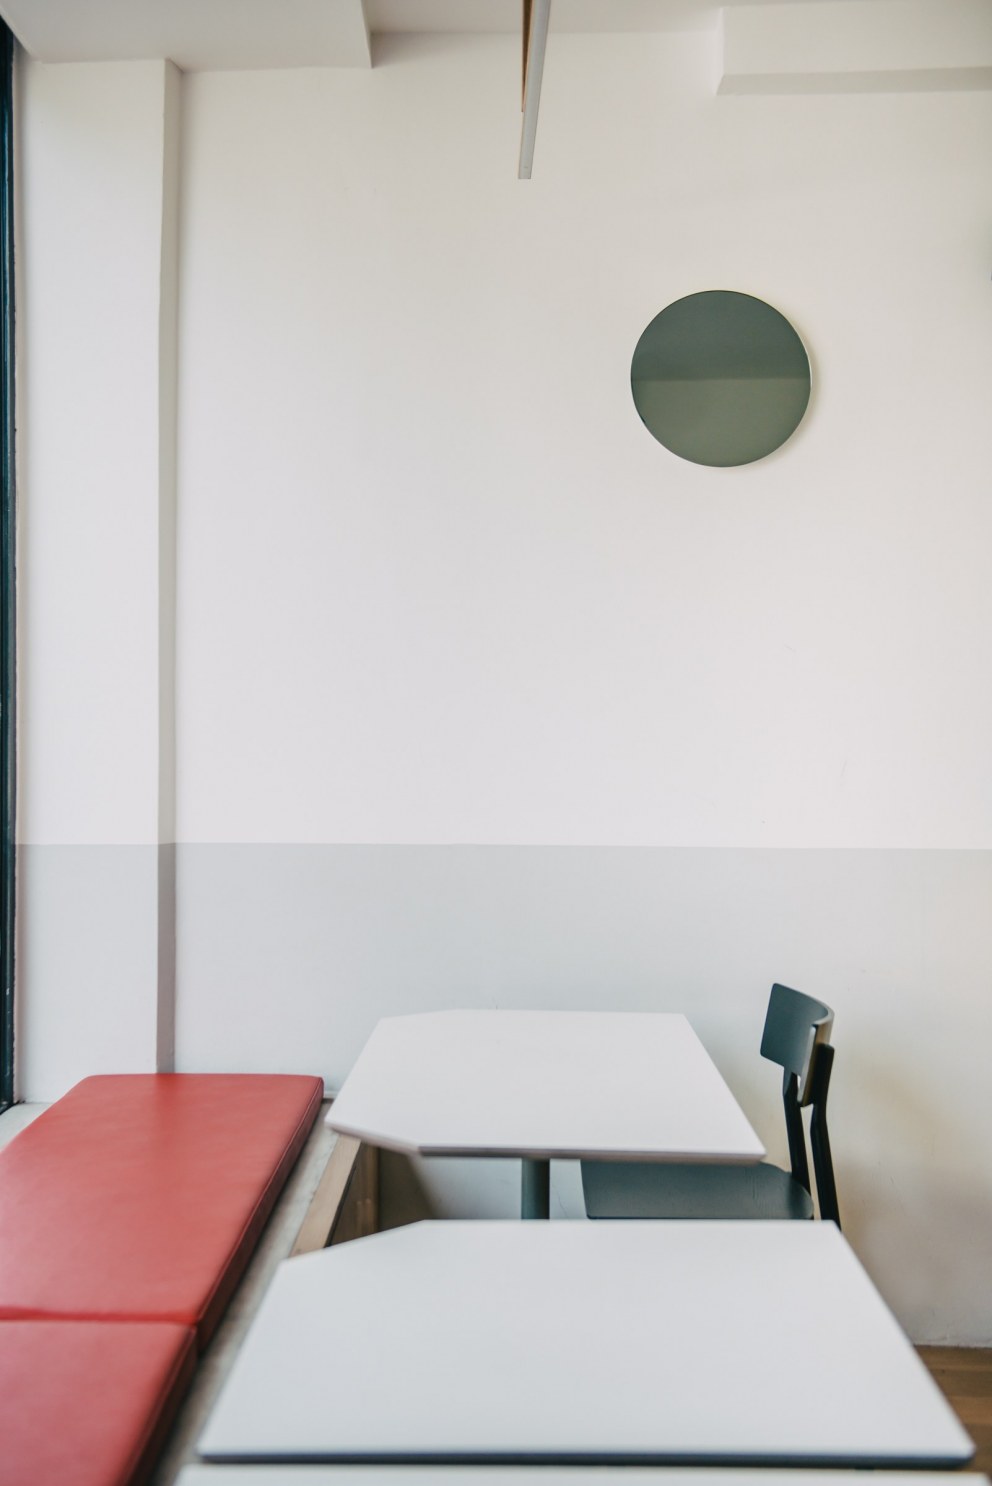 Community Cafe, Stoke Newington | Upholstered seating, bespoke mirrors and half height painted walls | Interior Designers